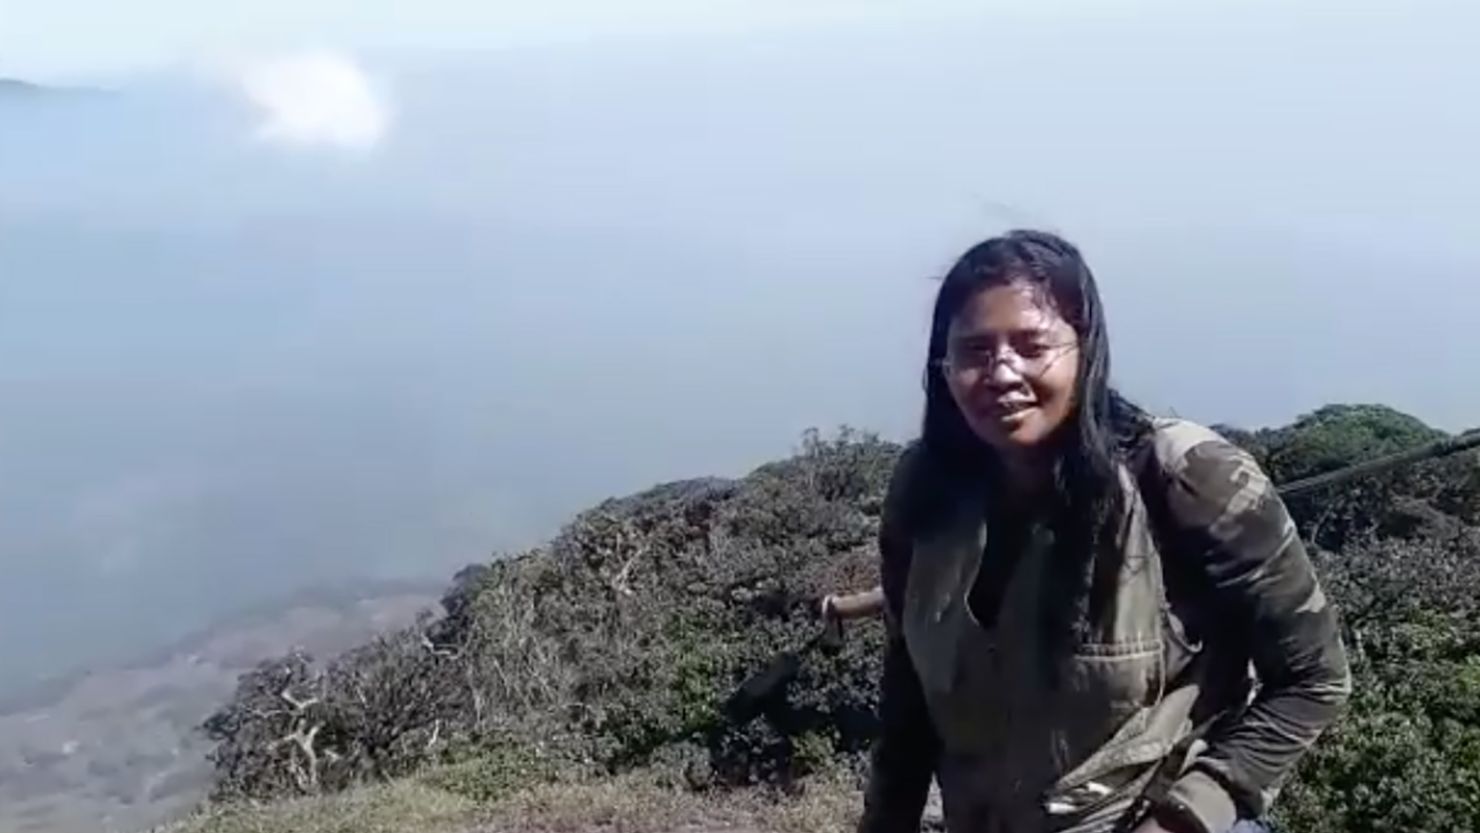 Dhanya Sanal posted this video of her ascent of mount Agasthyakoodam in the Western Ghats range, in India's Kerala state. She became the first Indian woman to climb the sacred mountain, after a court lifted a ban that prohibited women from scaling the peak.